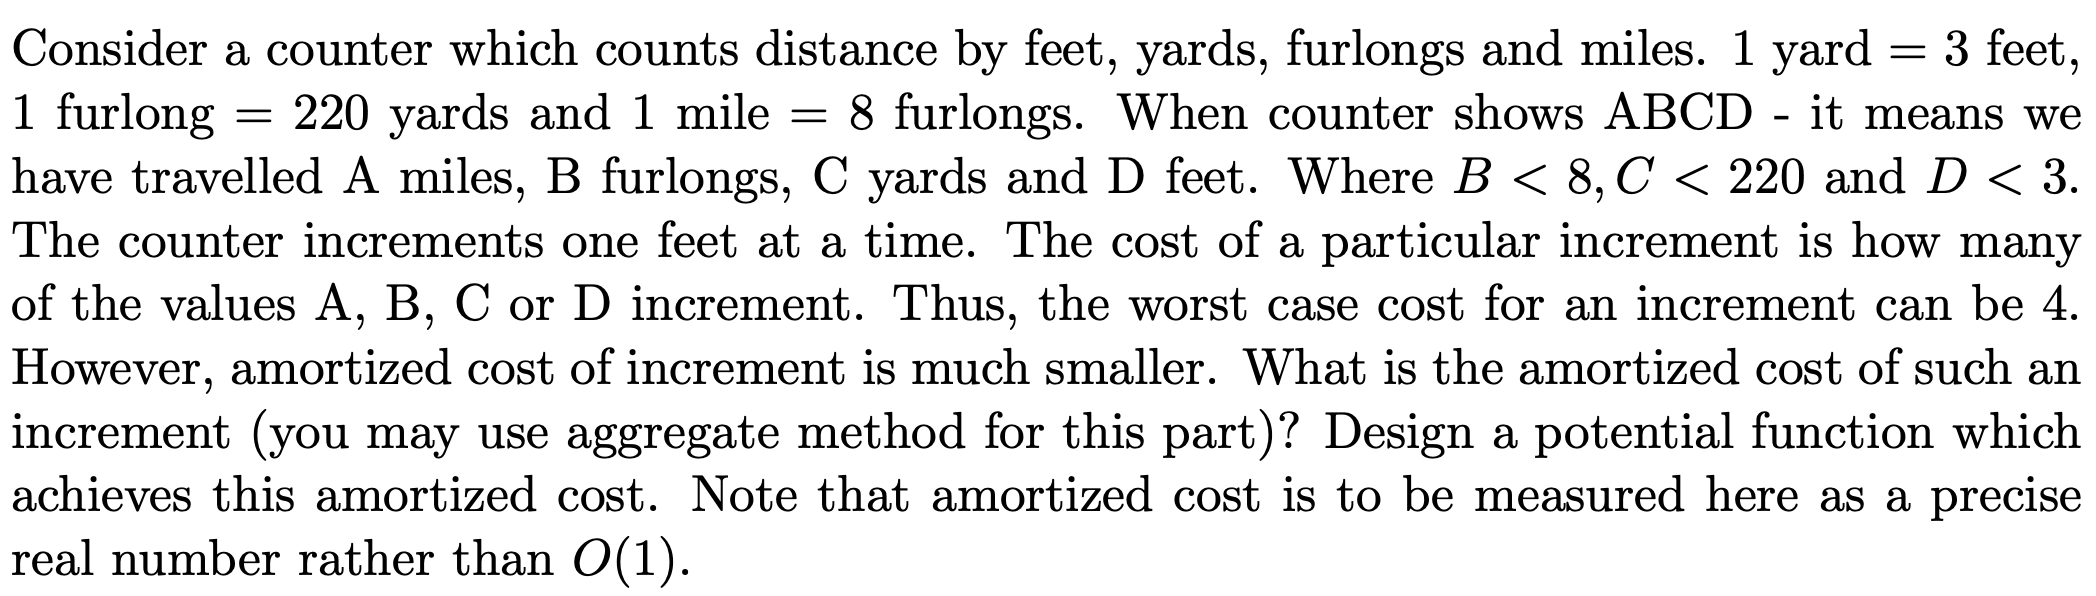 Consider a counter which counts distance by feet, yards, furlongs and miles. 1 yard = 3 feet, 1 furlong = 220